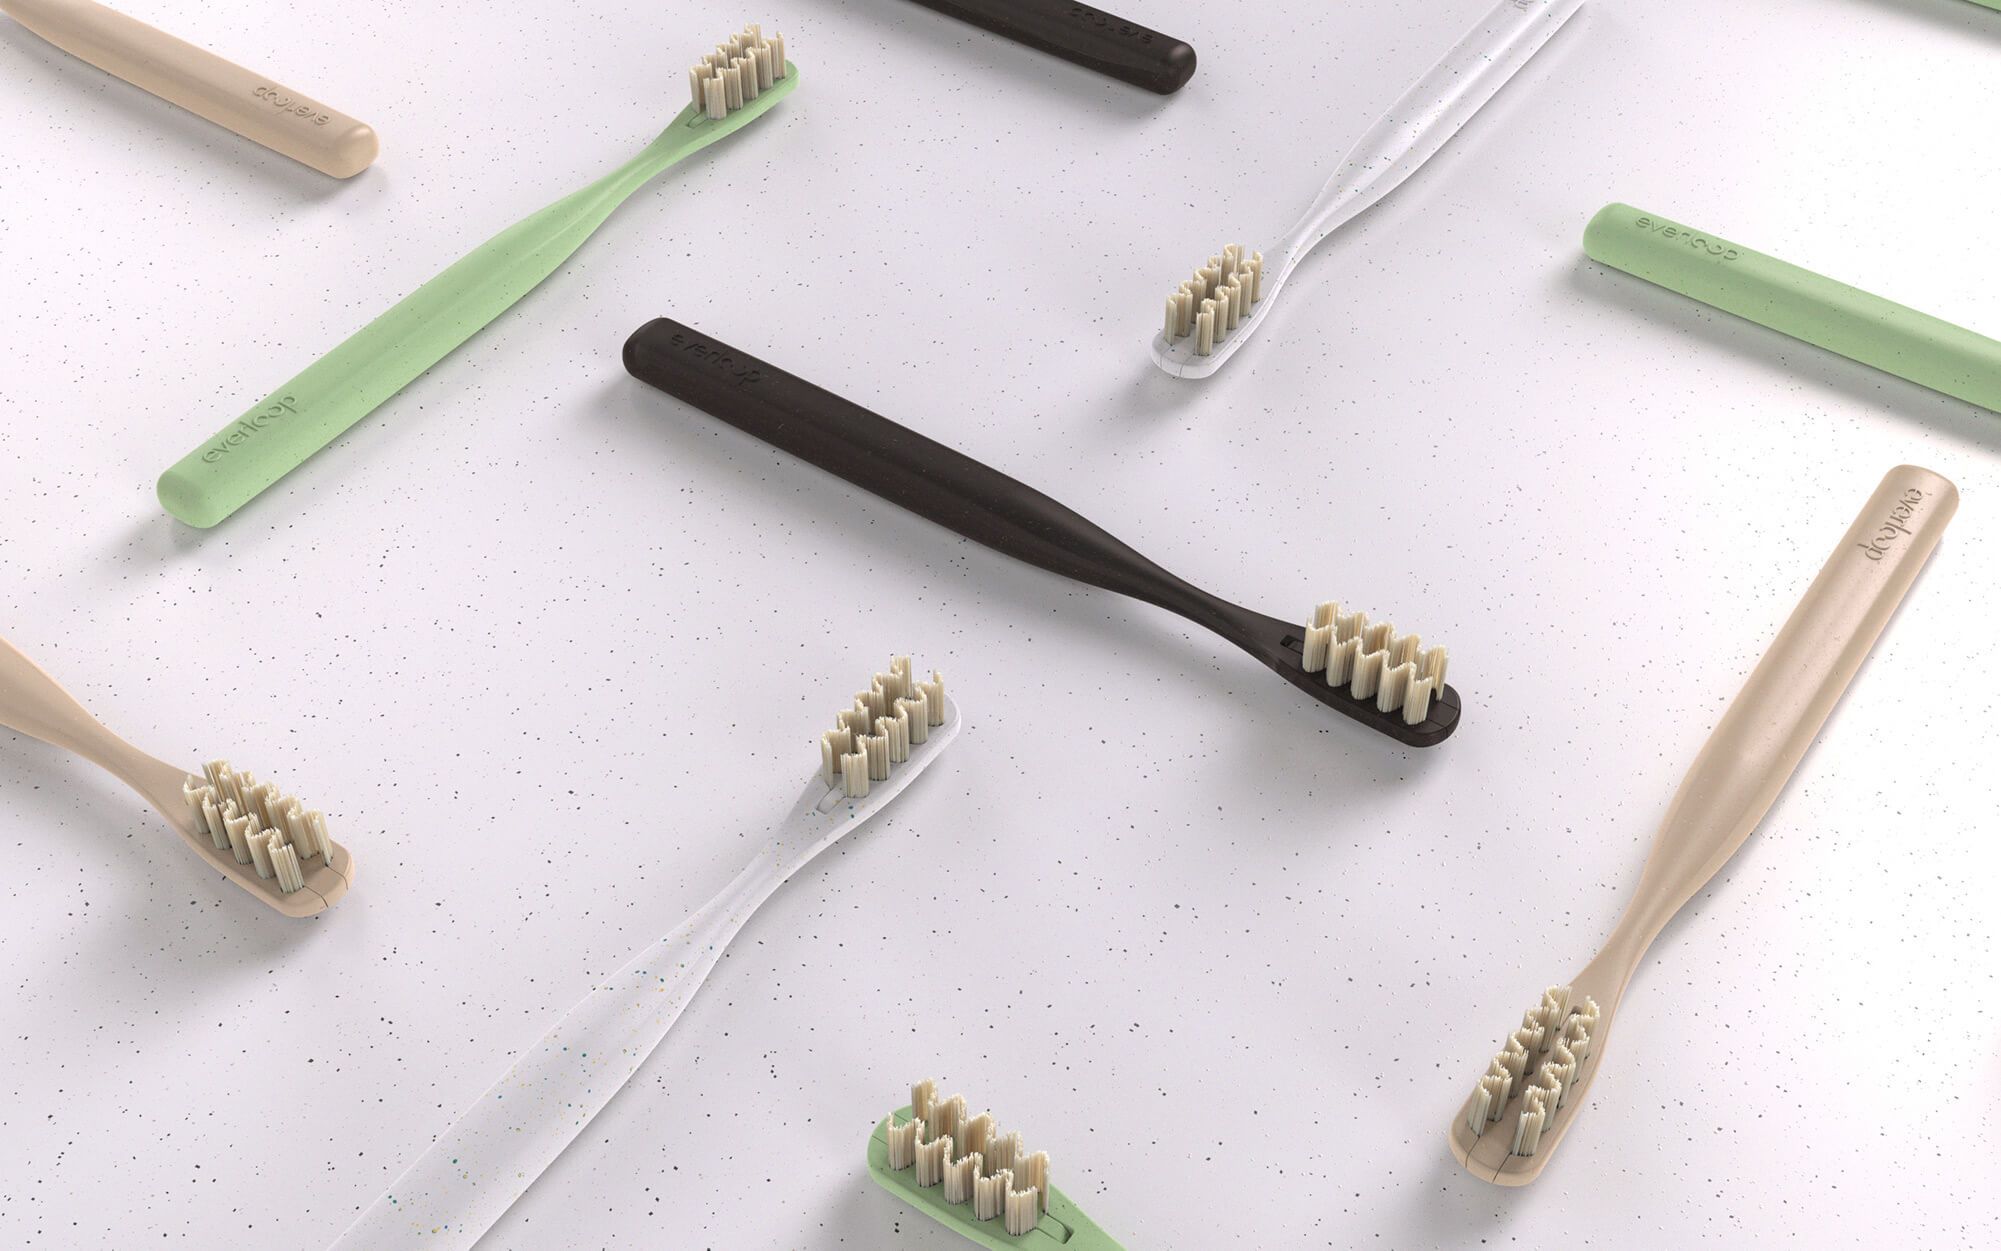 What Are Toothbrush Bristles Made Of